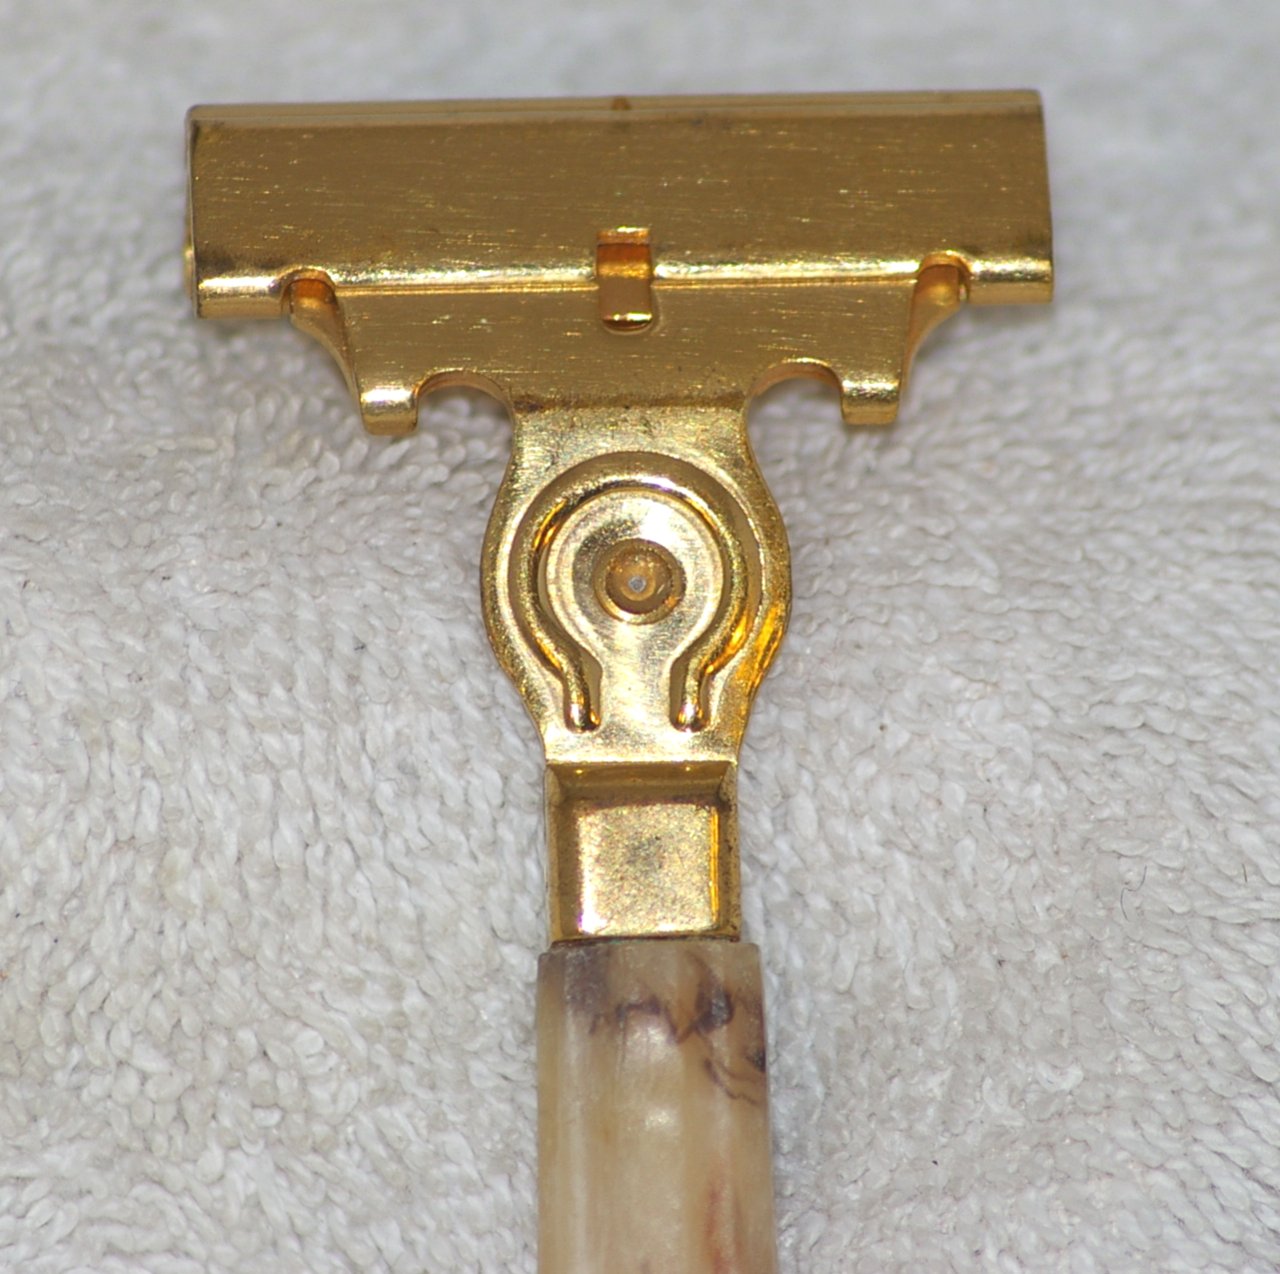 Schick Injector Razor, Type G1, but with E style head from 1946